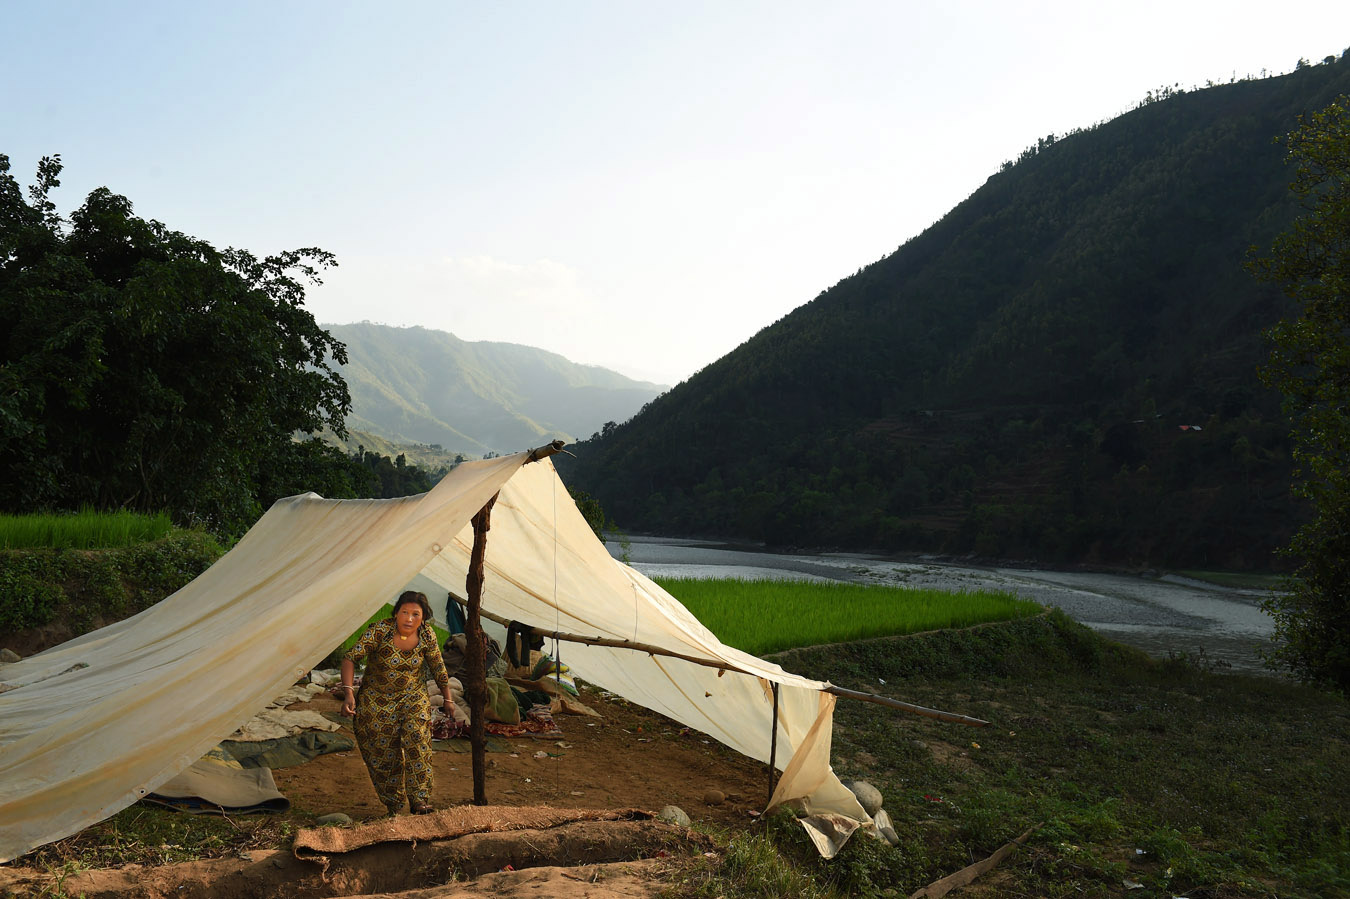 A woman walks out of a tent nestled in a scenic spot on Sunday May 03, 2015 in the Nuwakot District of Nepal. A deadly earthquake in Nepal has killed thousands. Tent encampments are a common sight as people have lost their homes or are afraid to return to them because of earthquake damage. (Photo by Matt McClain/ The Washington Post)